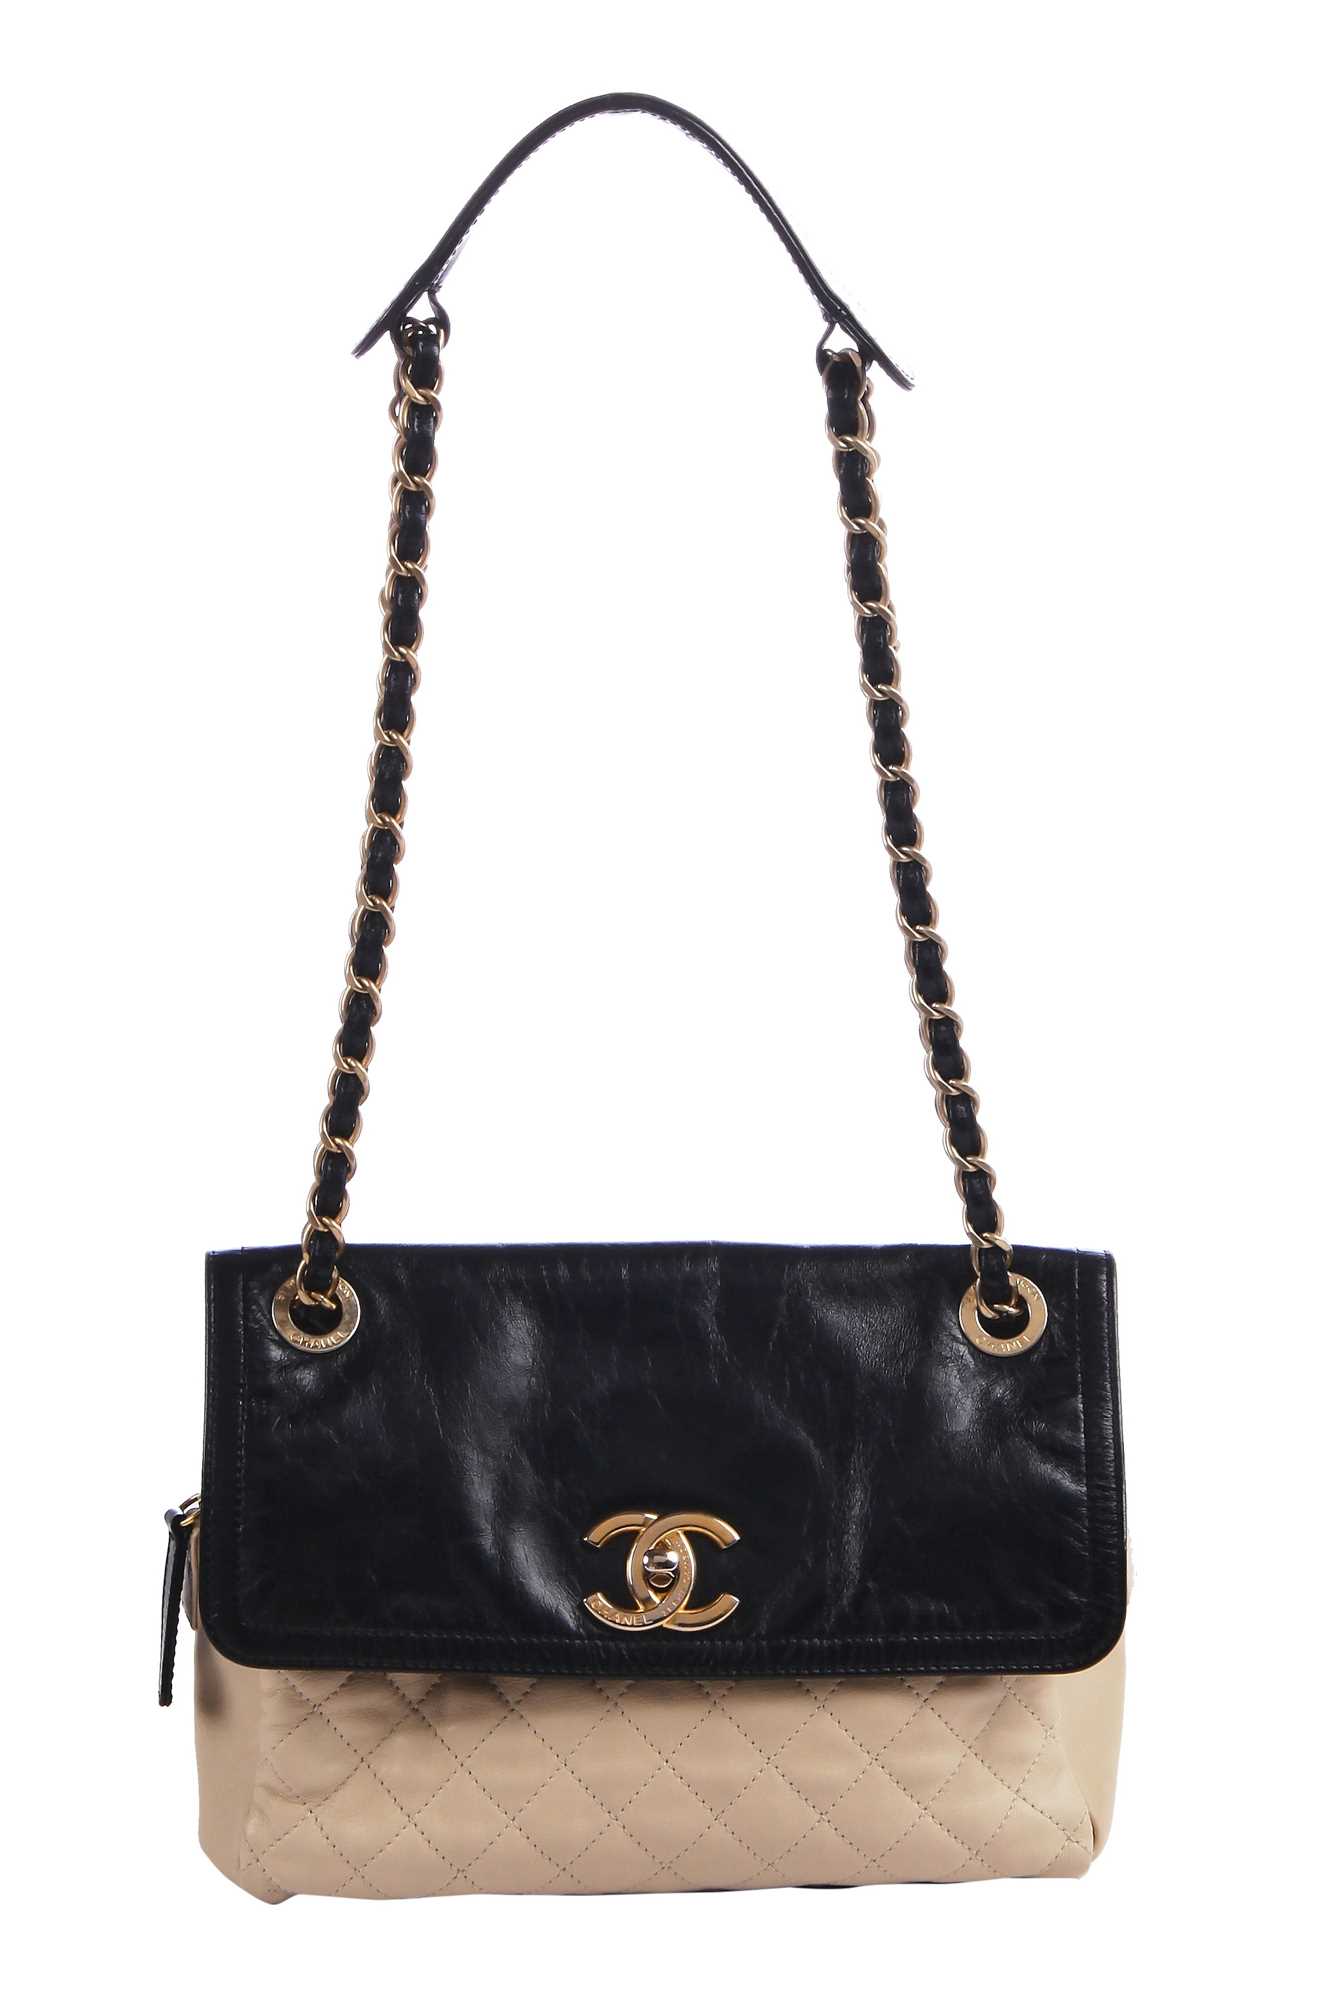 Lot 6 - Chanel two-tone quilted leather bag, 2012